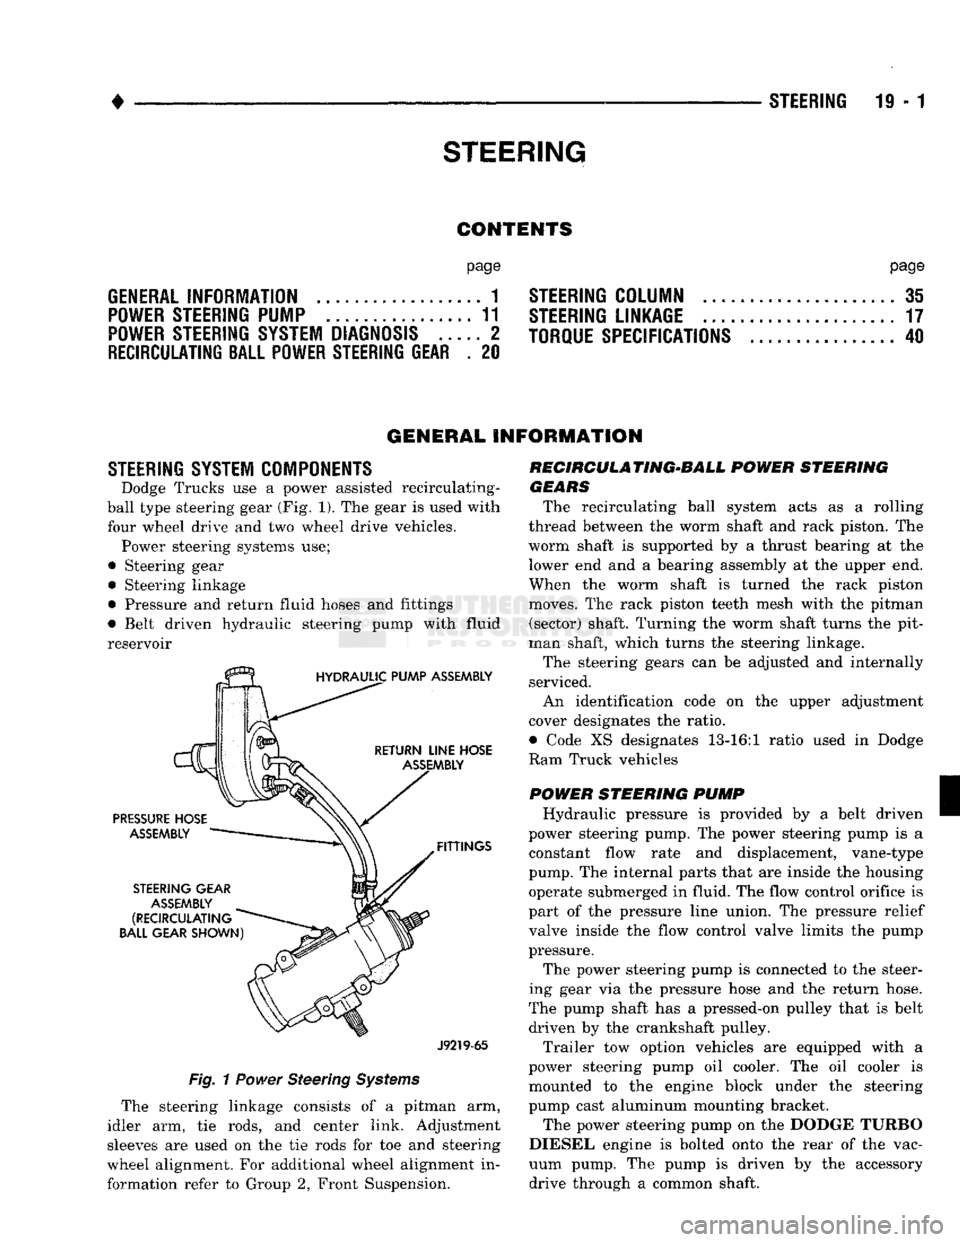 DODGE TRUCK 1993  Service Repair Manual 
• 

STEERING  STEERING
 19-1 

CONTENTS 

page 

GENERAL INFORMATION
 1 
 POWER STEERING PUMP
 11 

POWER STEERING SYSTEM DIAGNOSIS
 ..... 2 

RECIRCULATING
 BALL
 POWER STEERING GEAR
 . 20 
 page 